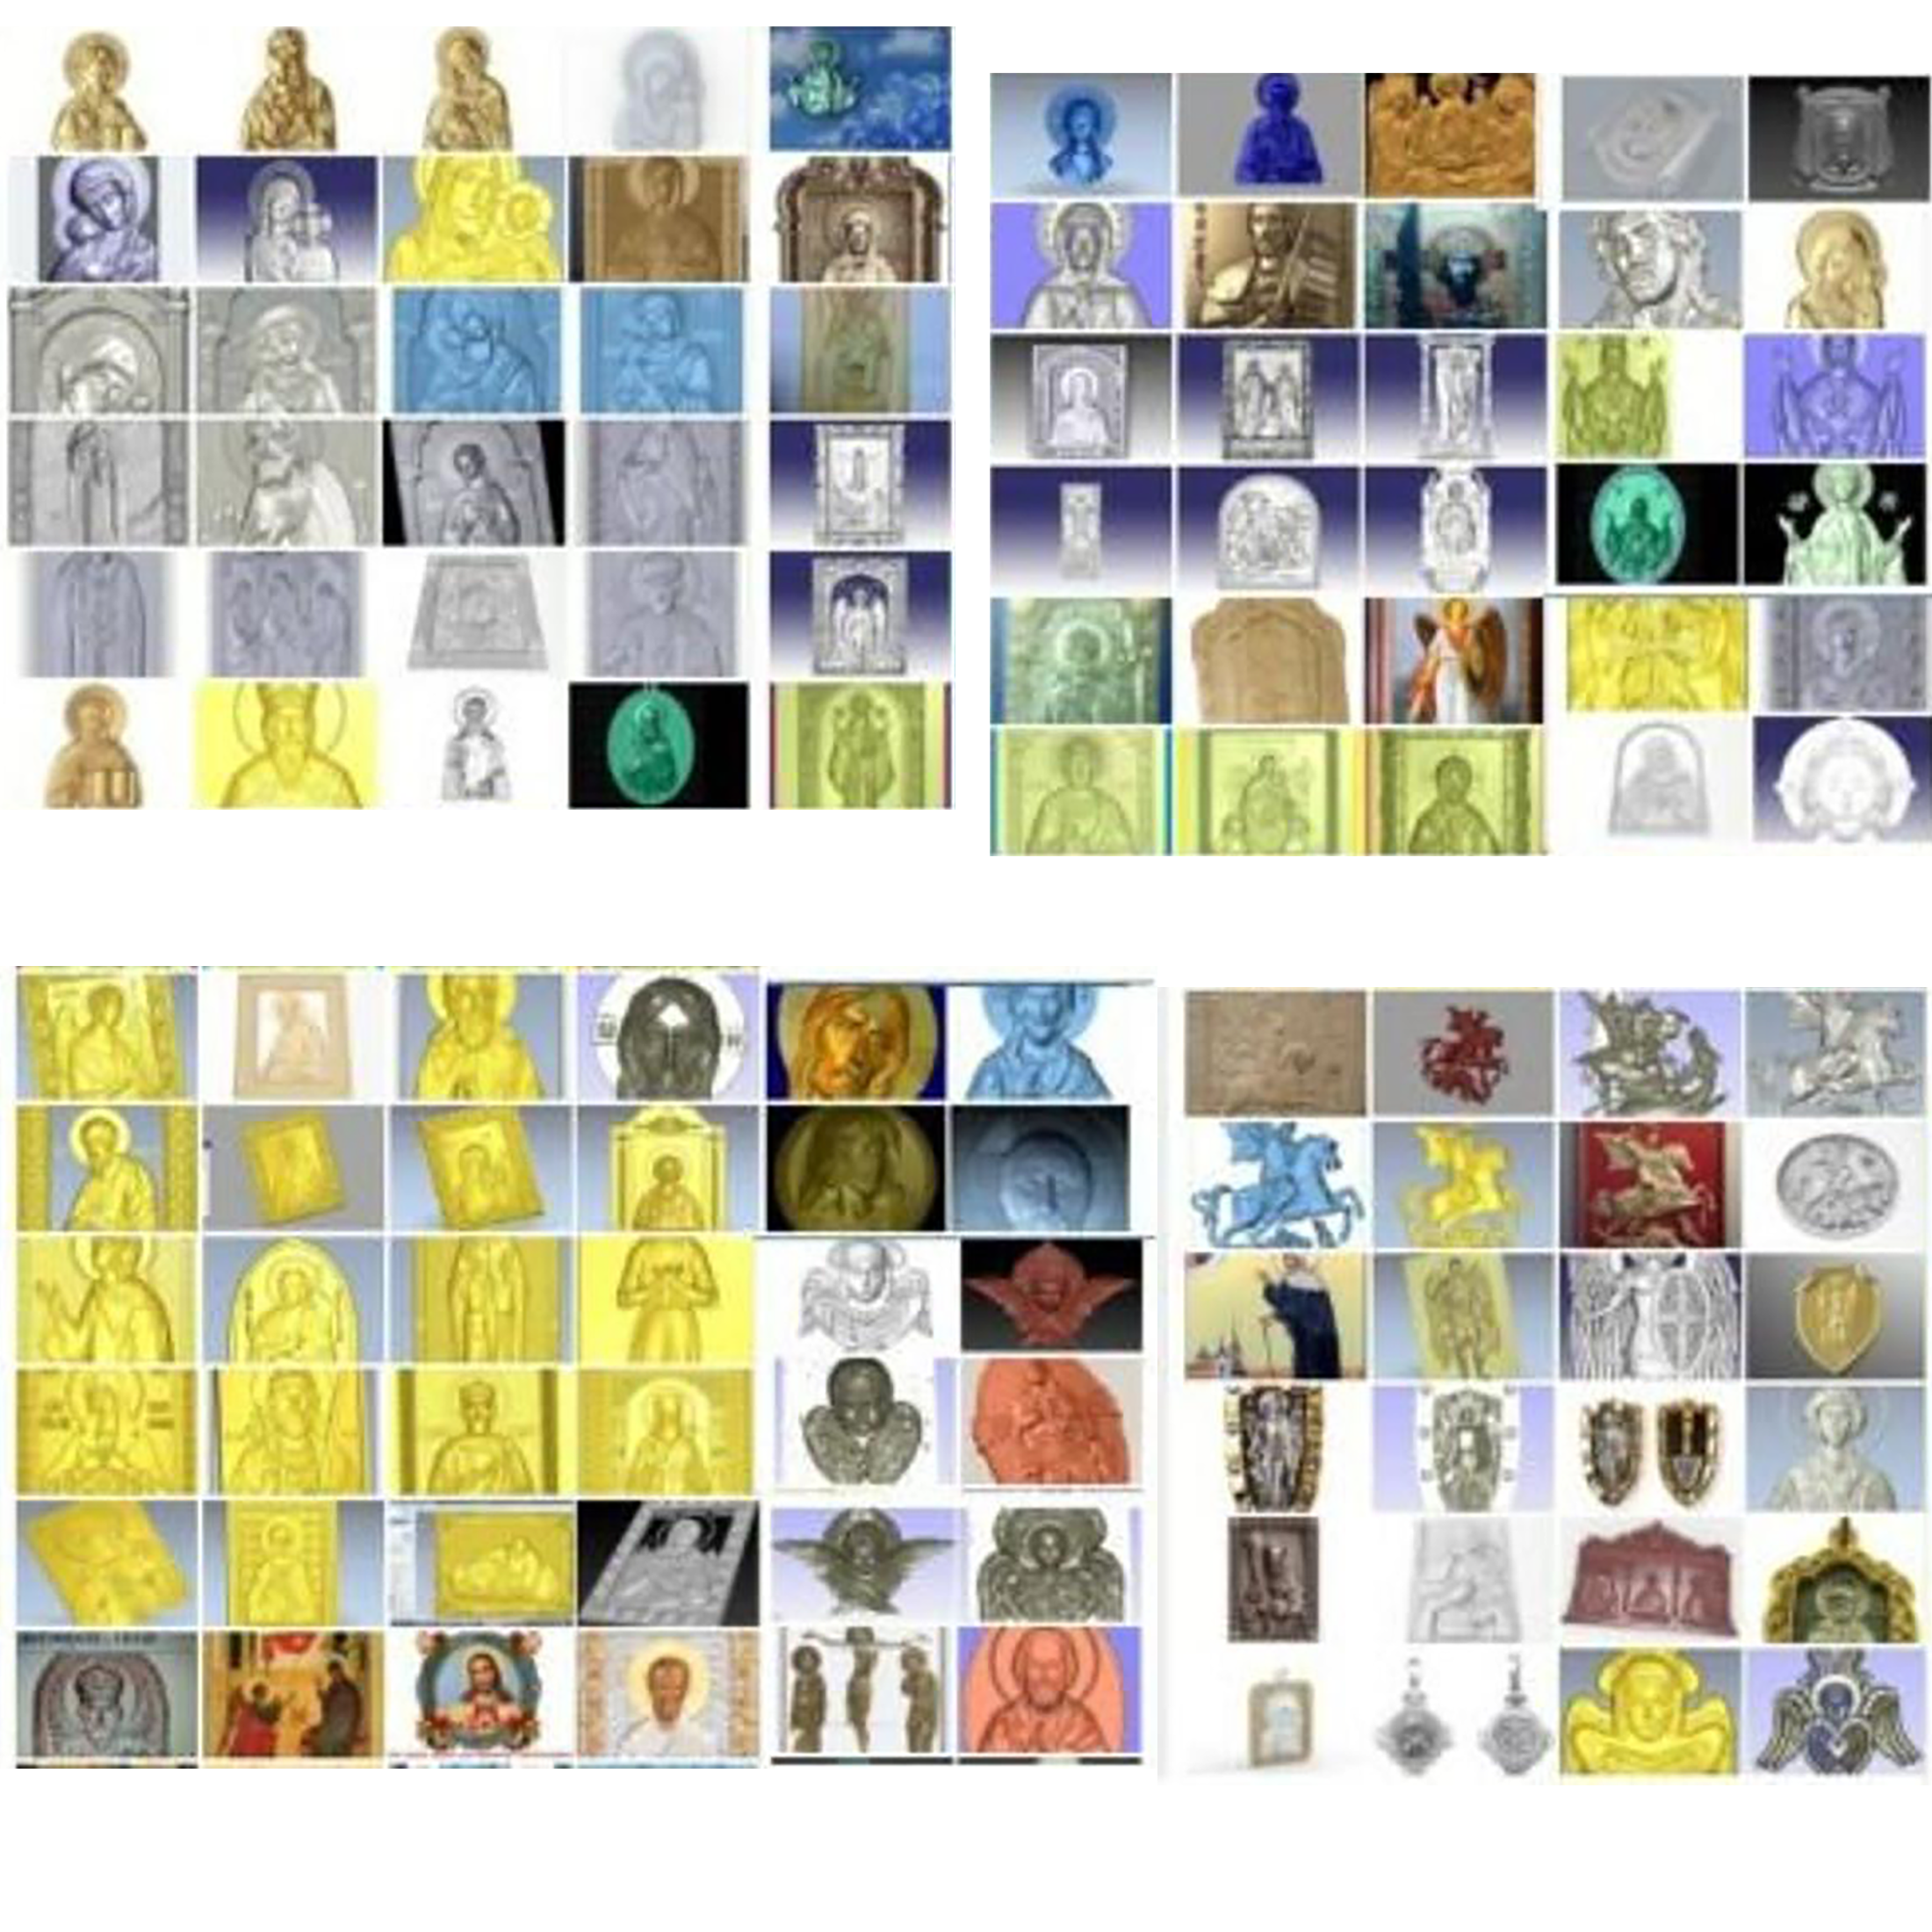 125+ religion stl pack medalions icons for cnc in stl file format